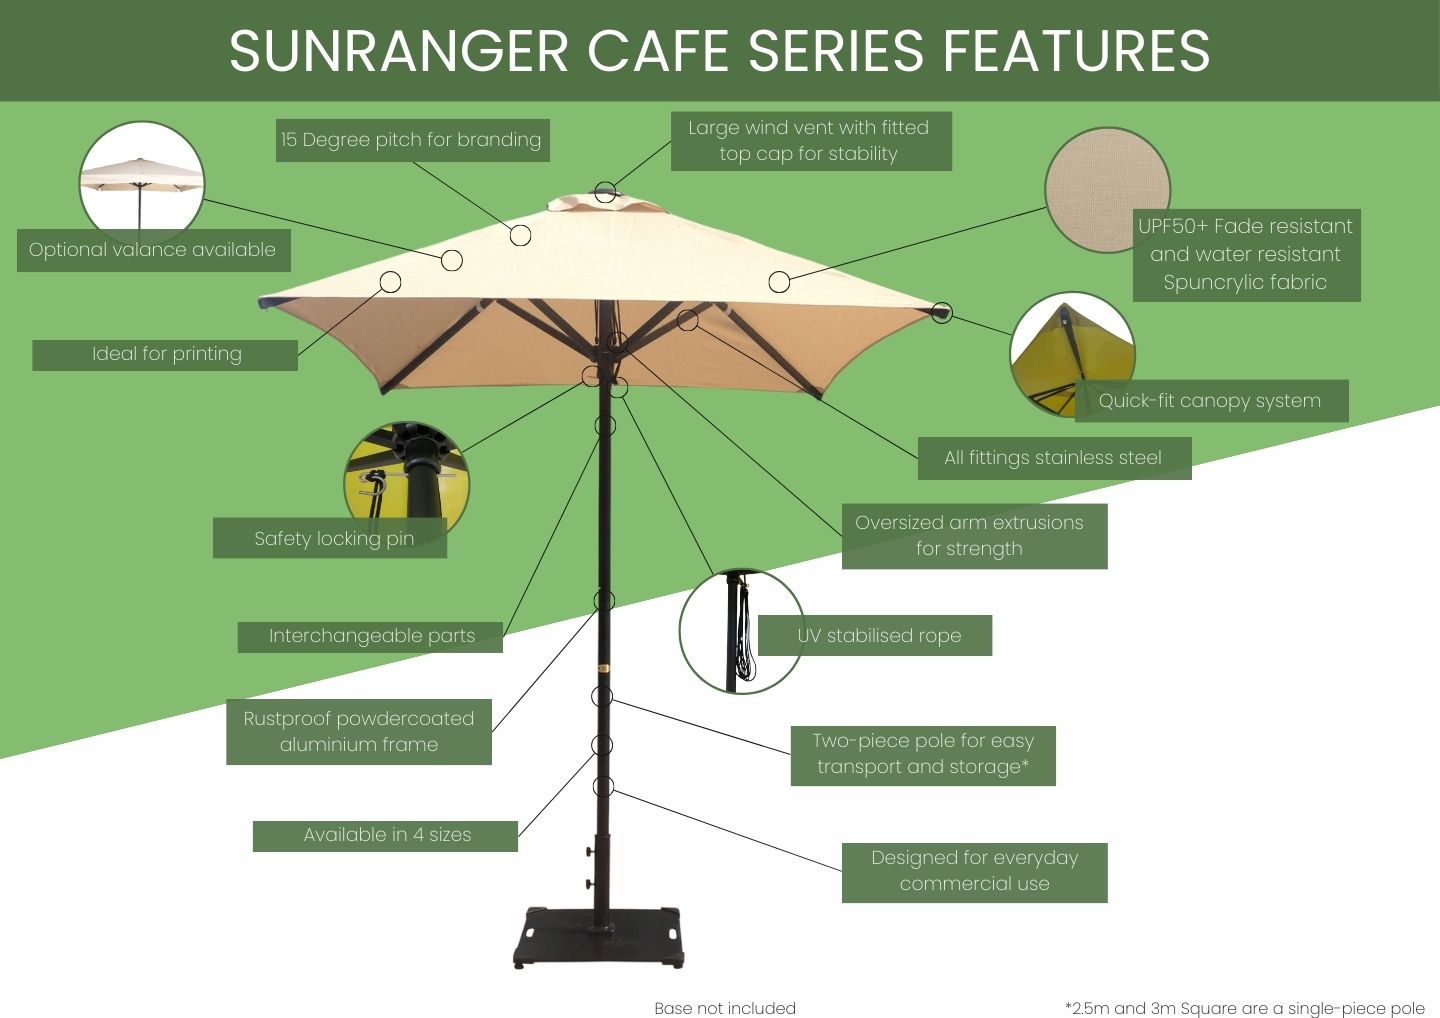 Sunranger Cafe Feature Infographic